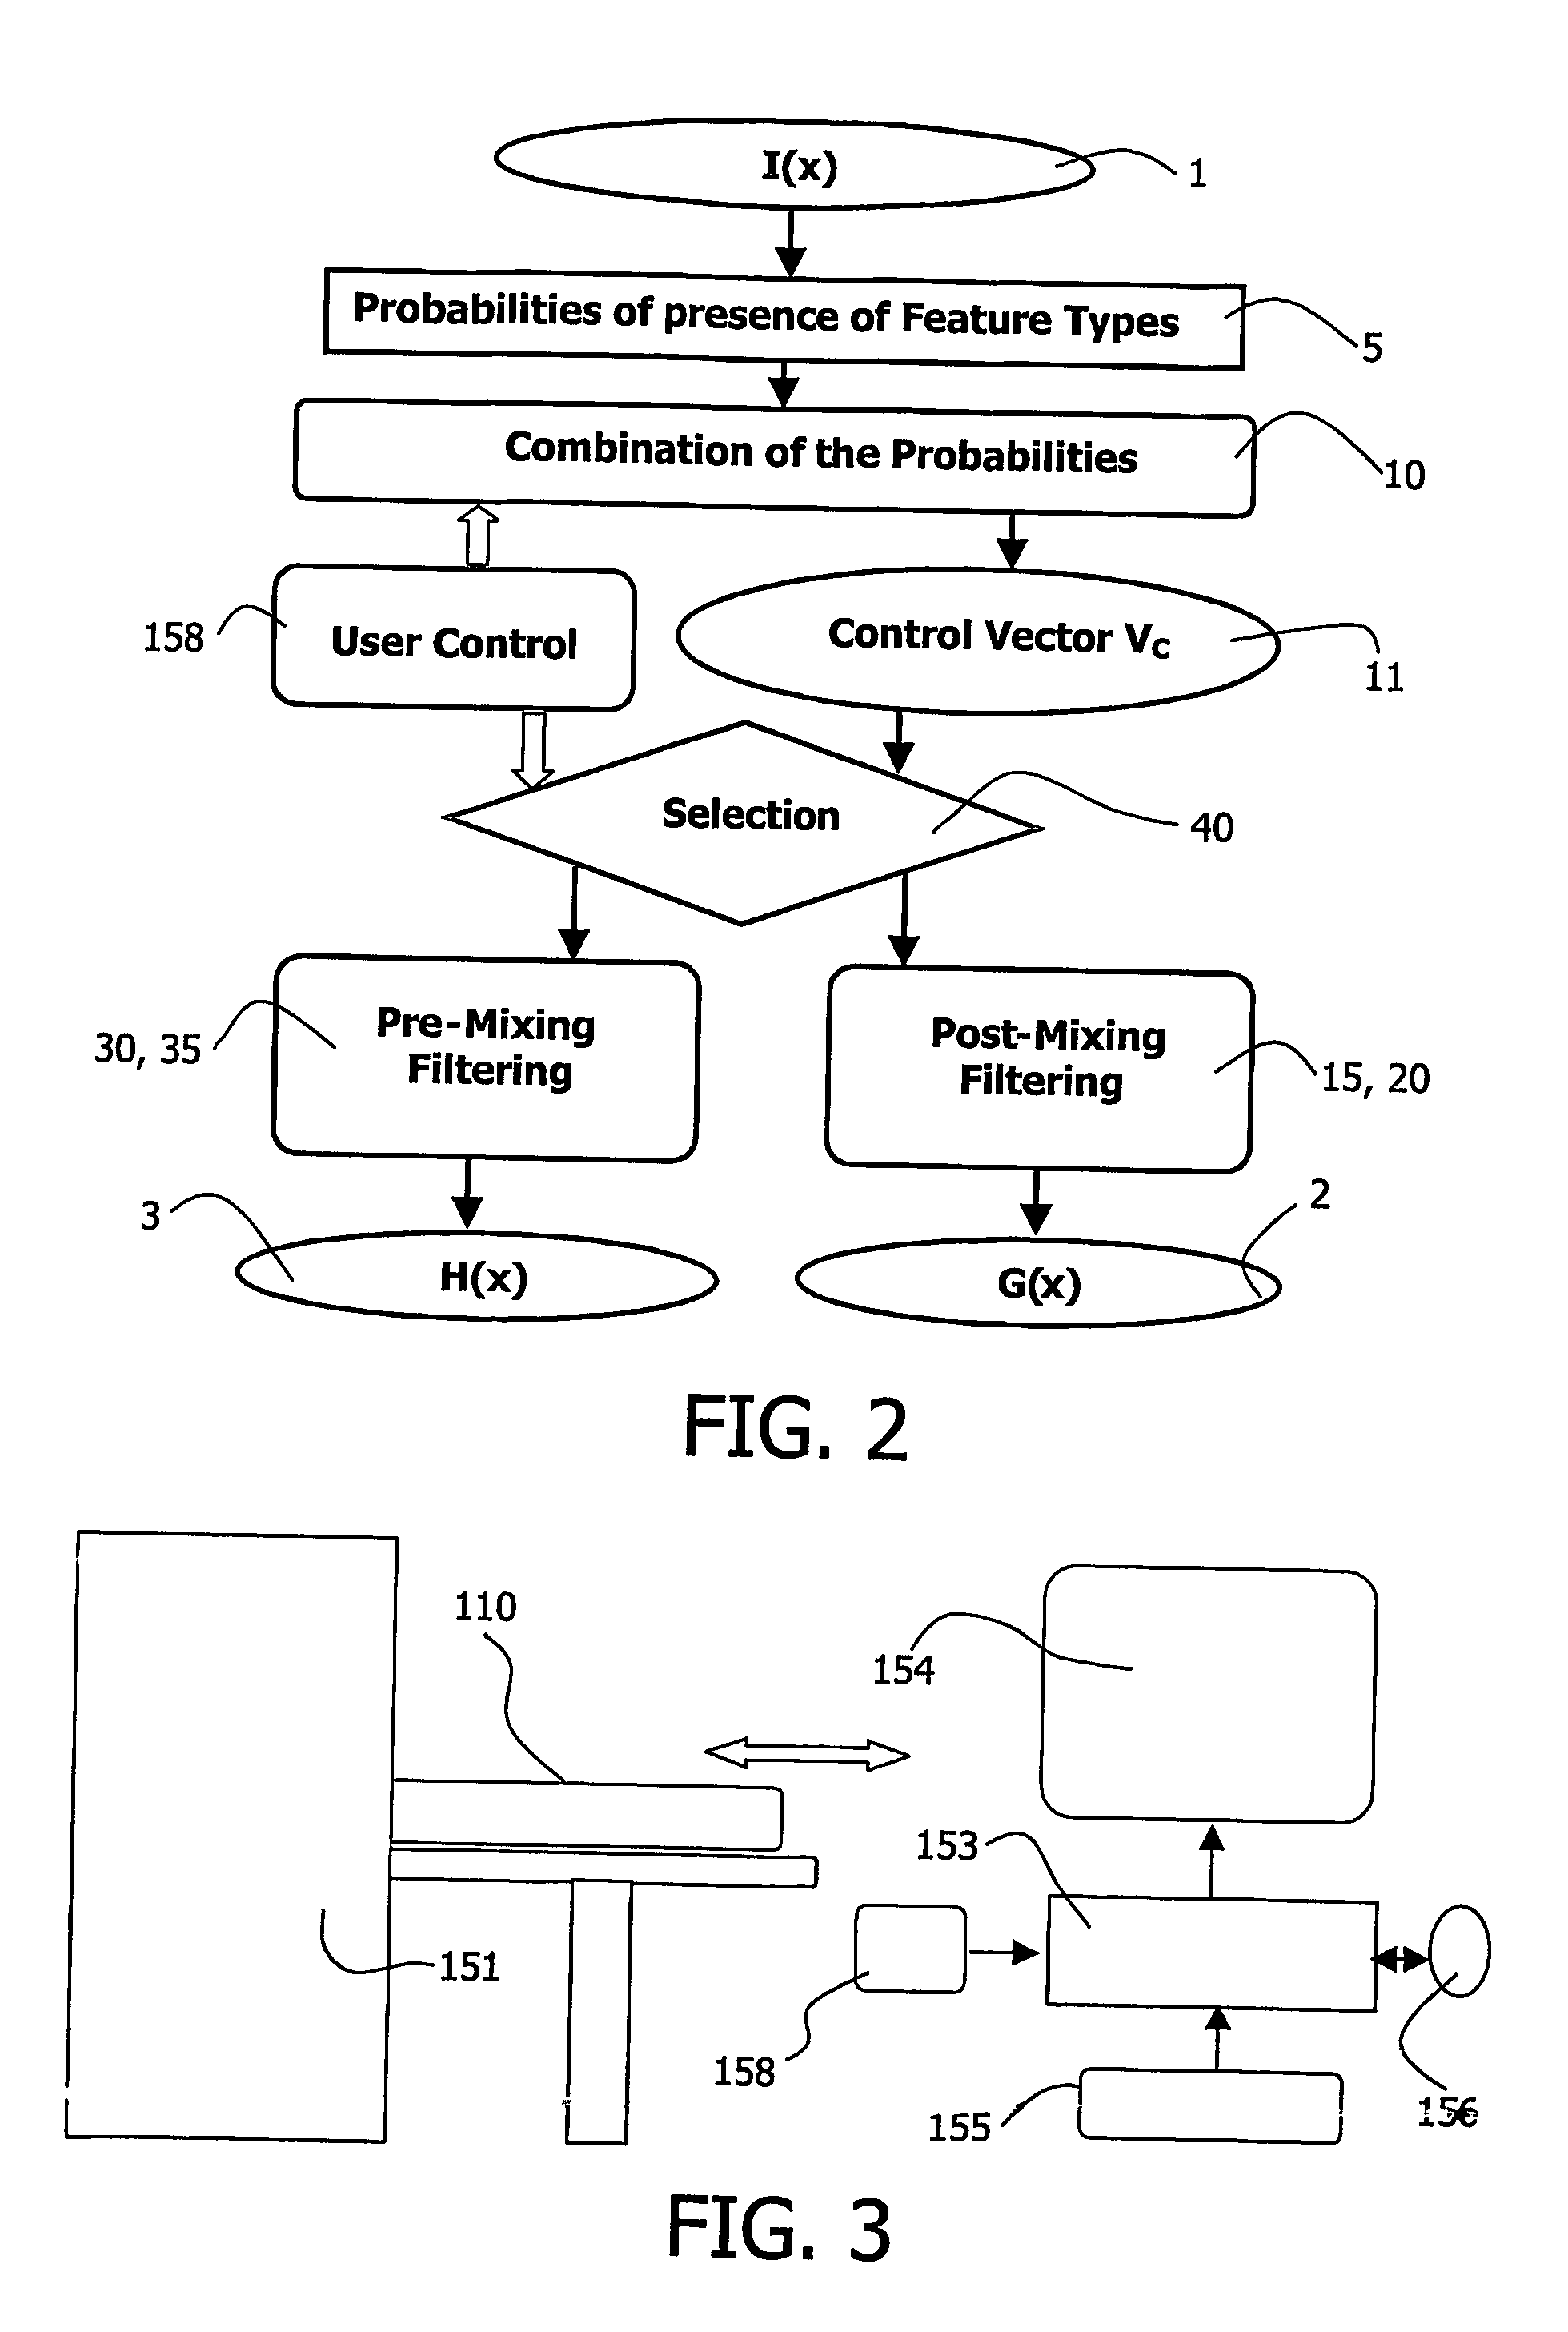 Image viewing system and method for generating filters for filtering image features according to their type